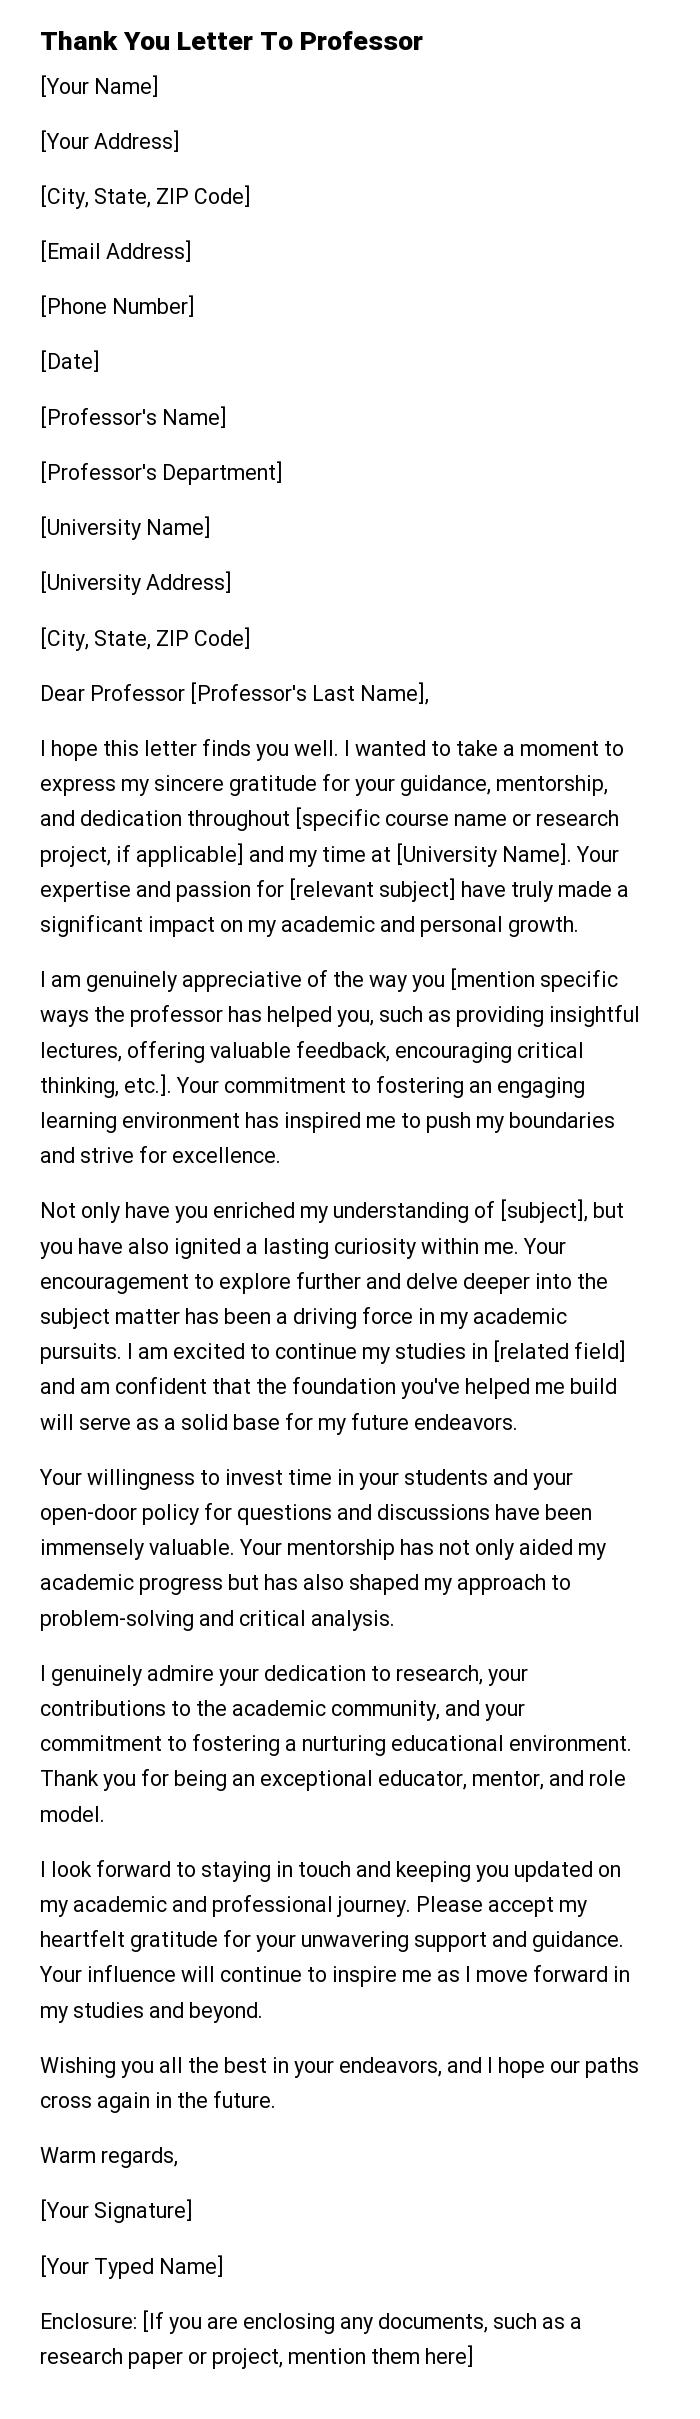 Thank You Letter To Professor